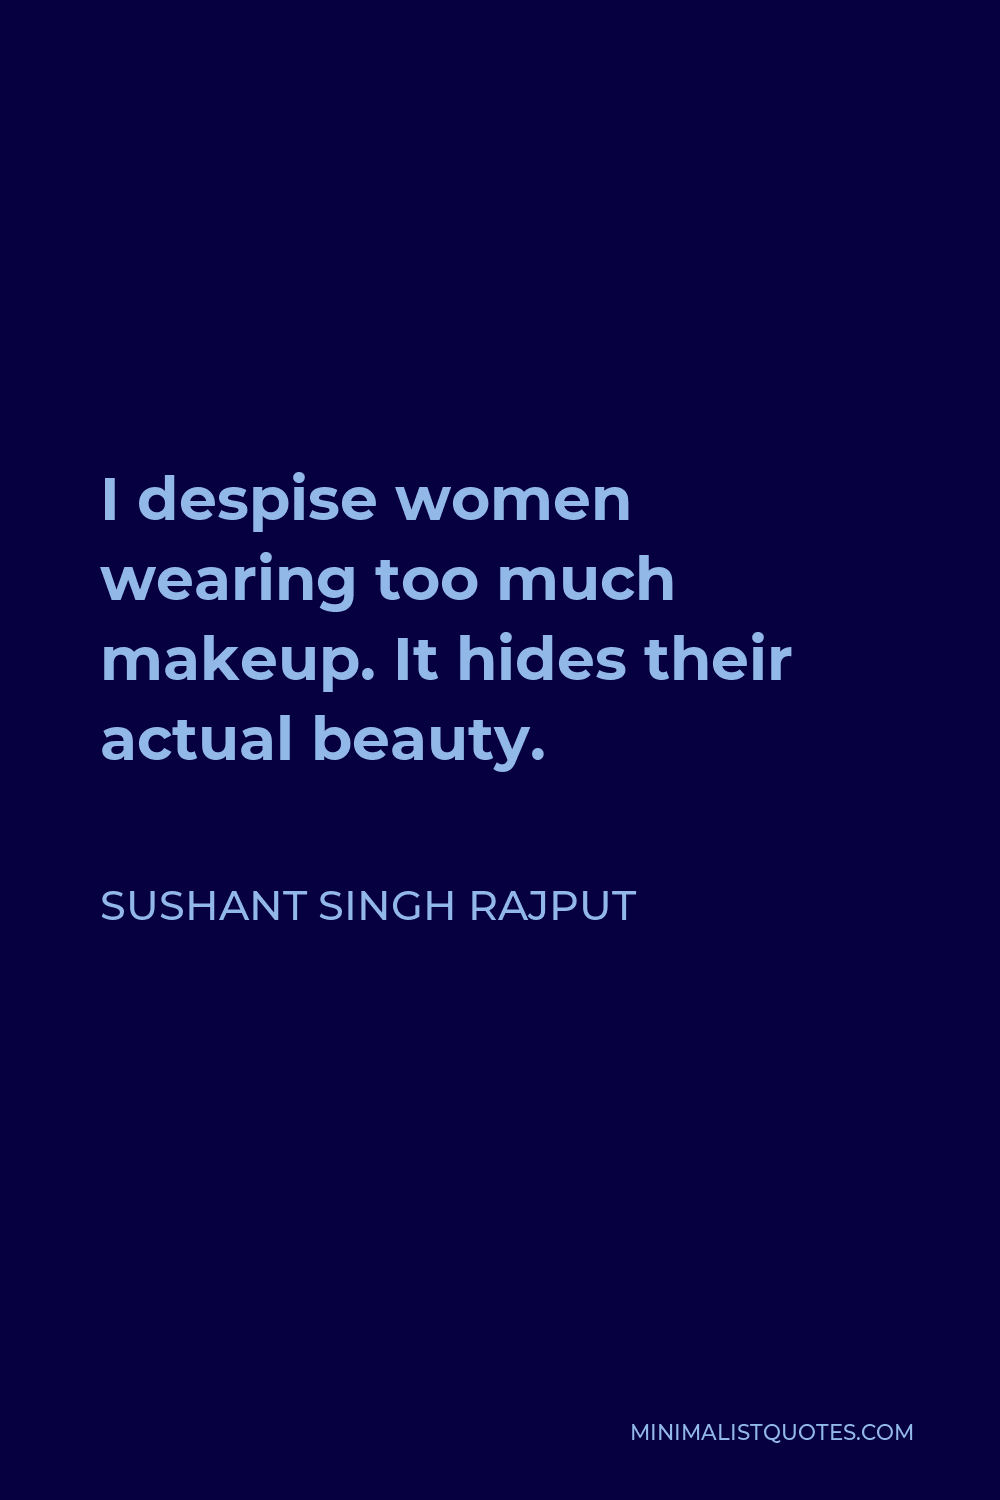 Sushant Singh Rajput Quote - I despise women wearing too much makeup. It hides their actual beauty.